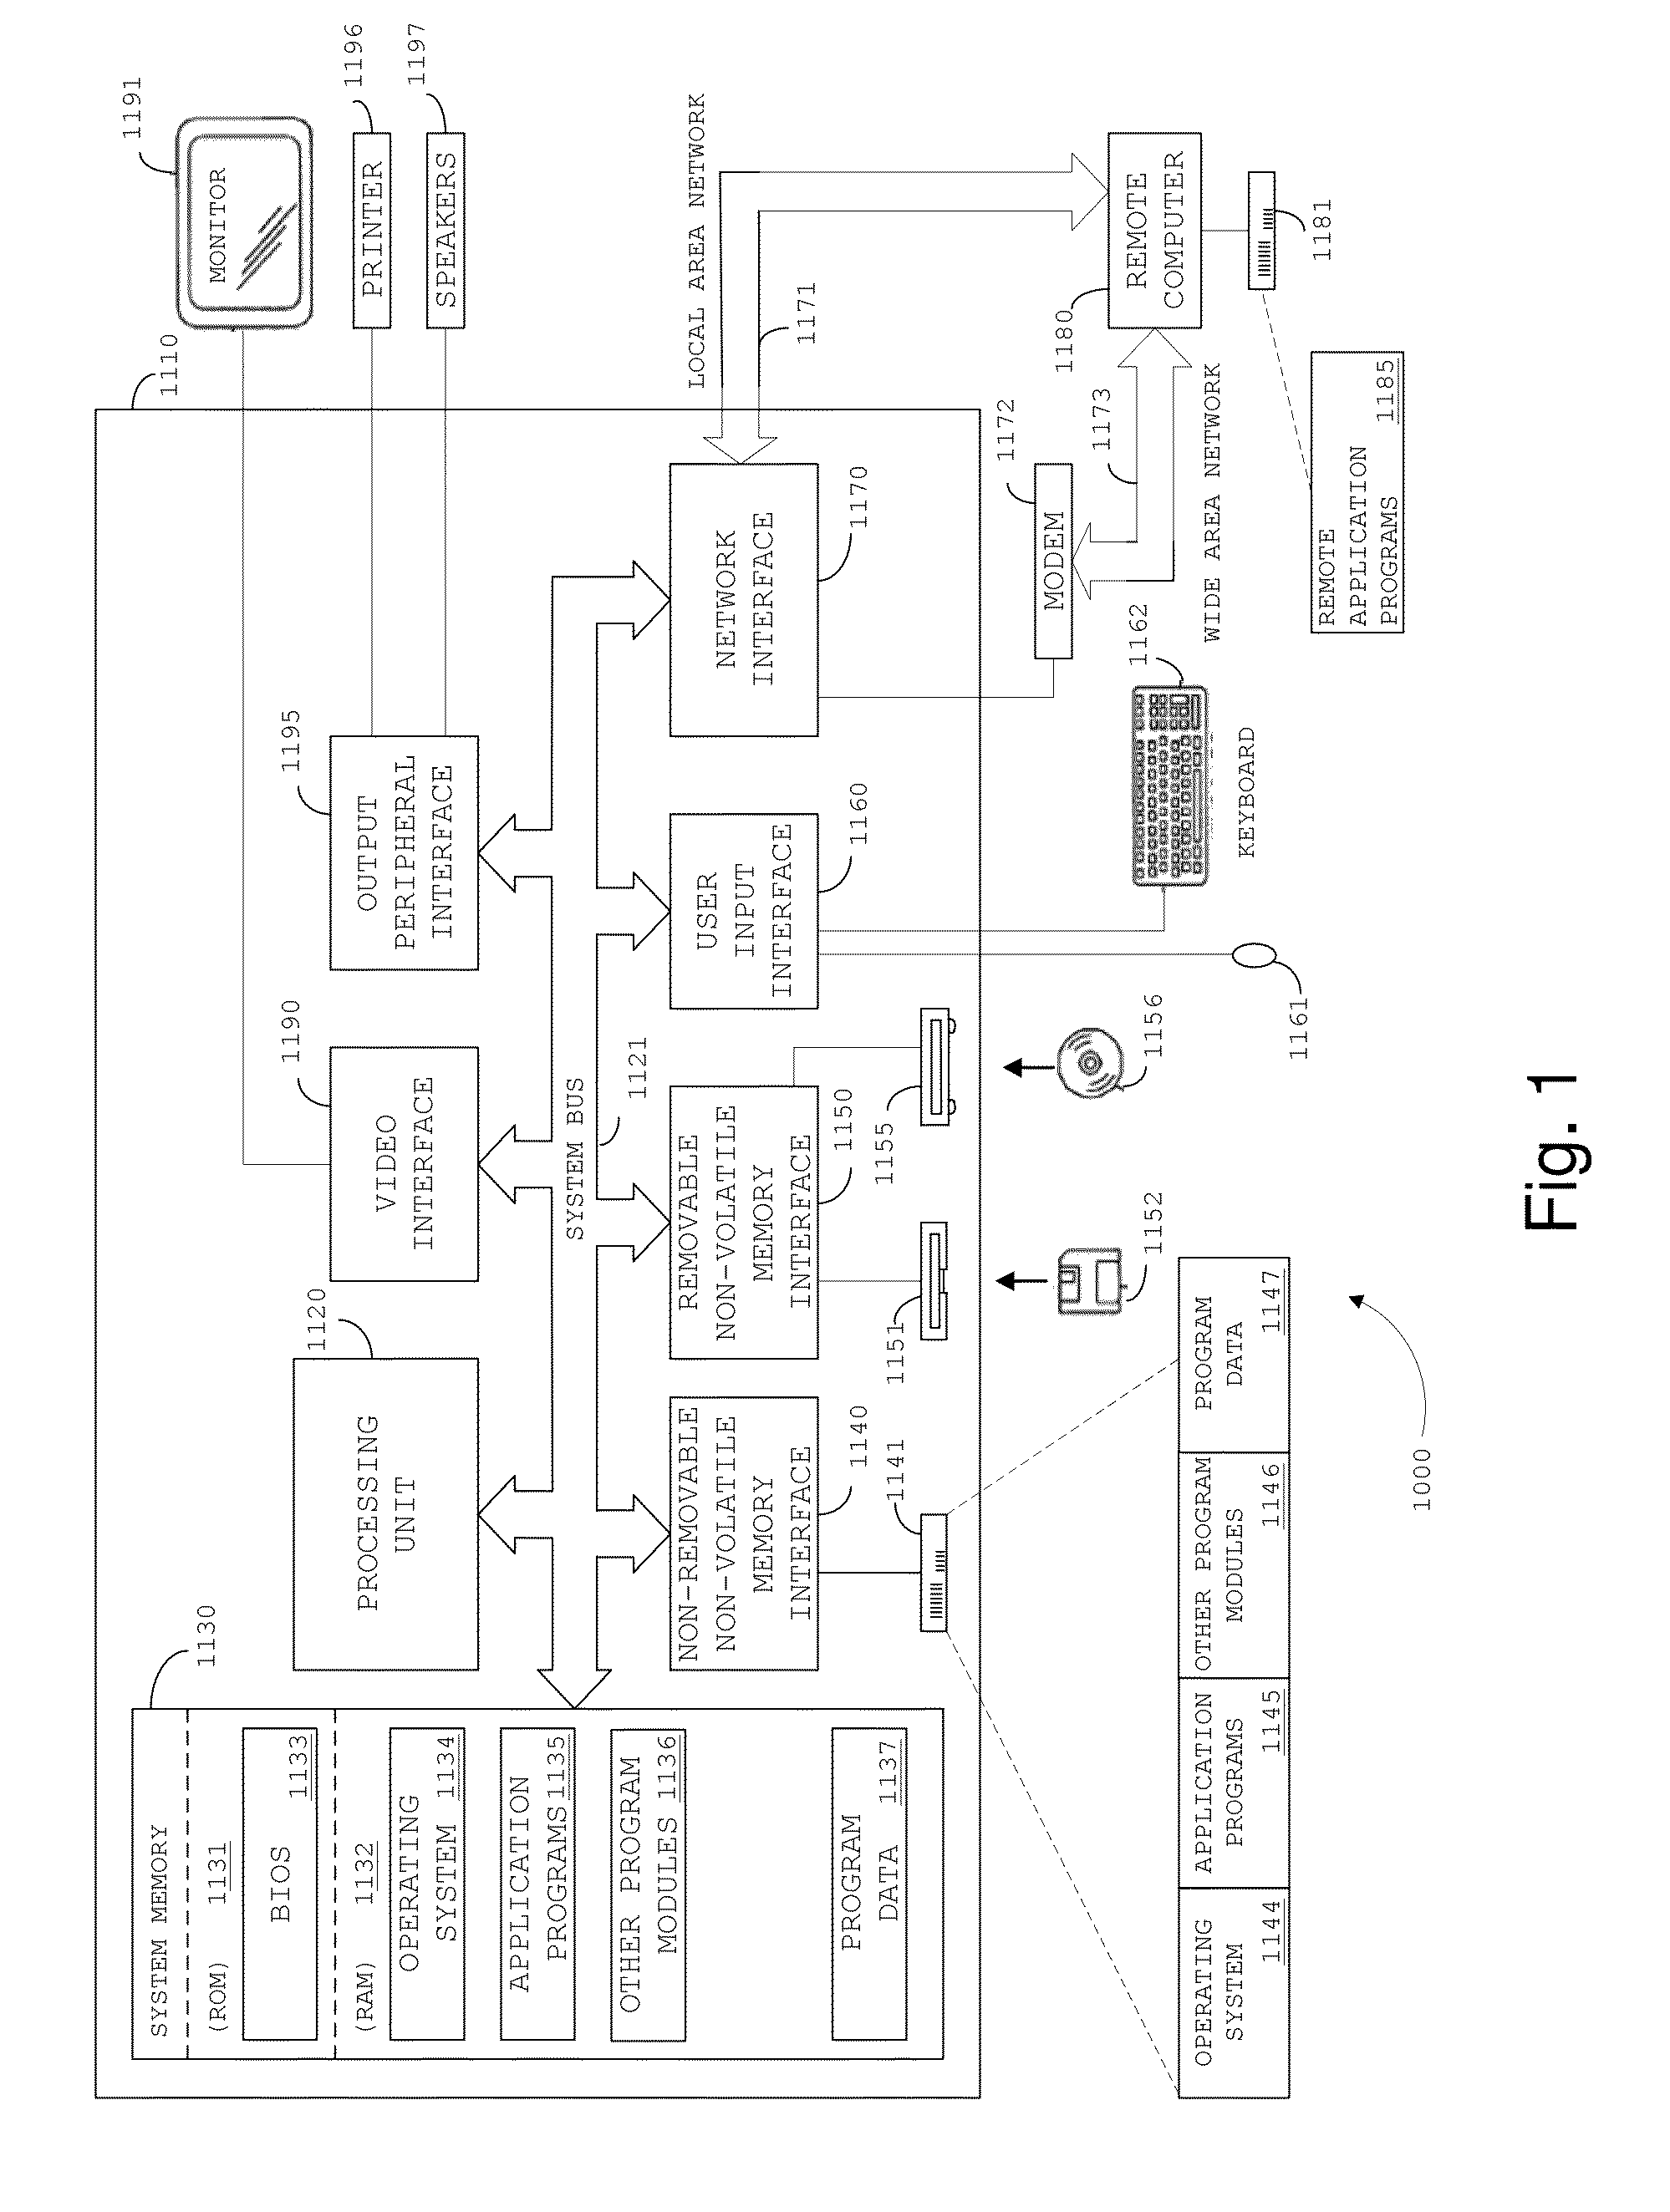 Method and apparatus for classifying pixels in an input image and image processing system